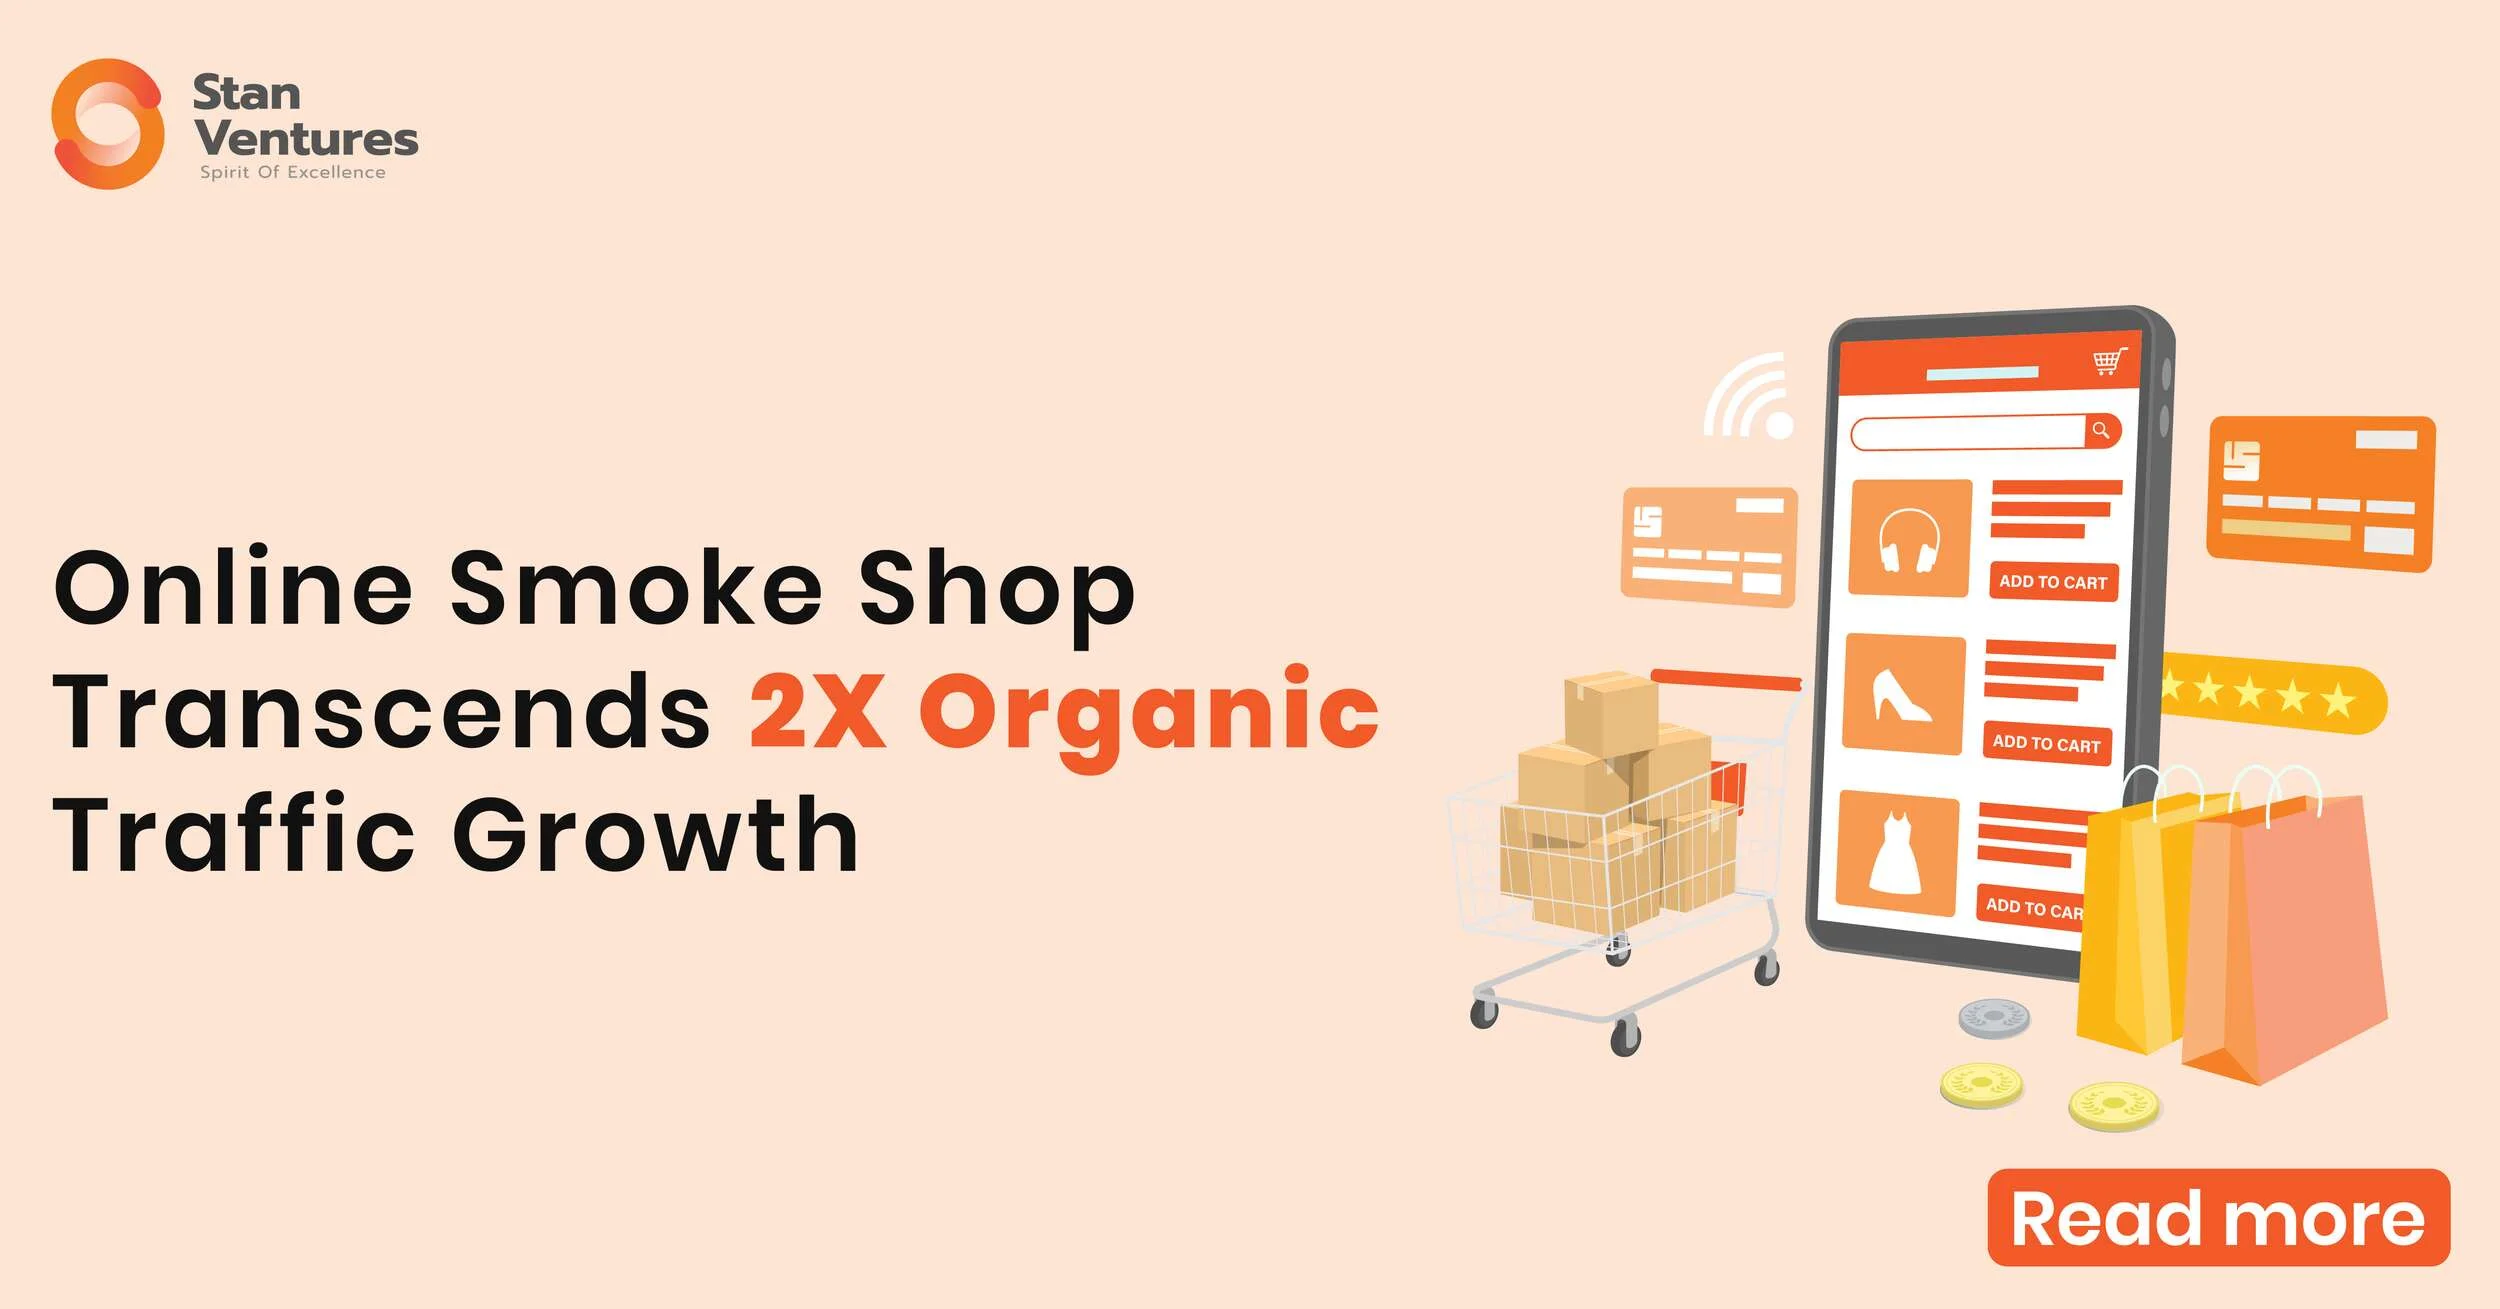 online smoke shop transcends 2x organic traffic growth - featured image